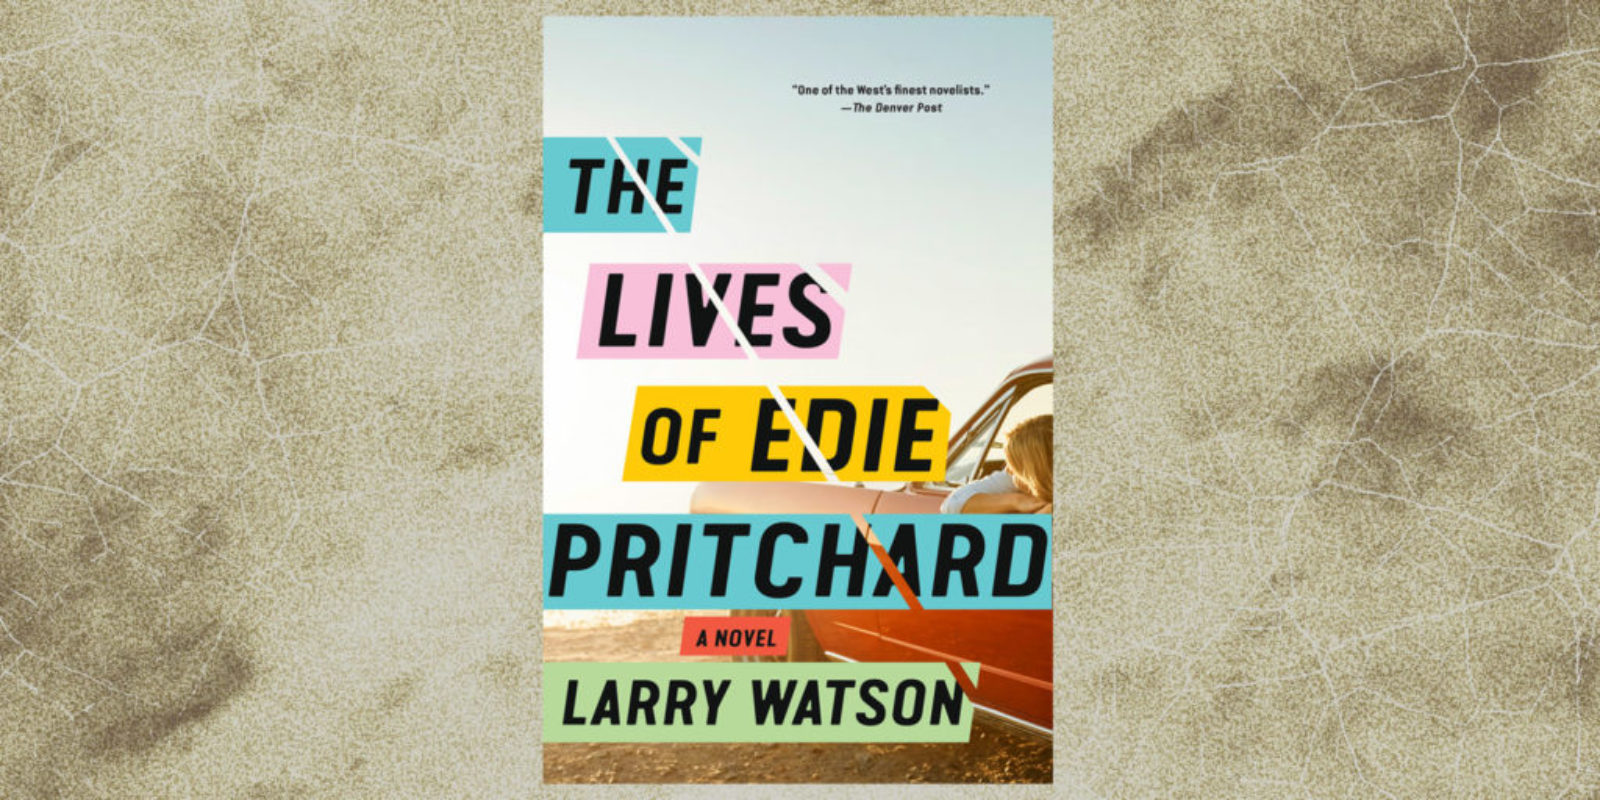 The-Lives-of-Edie-Pritchard-by-Larry-Watson-Header